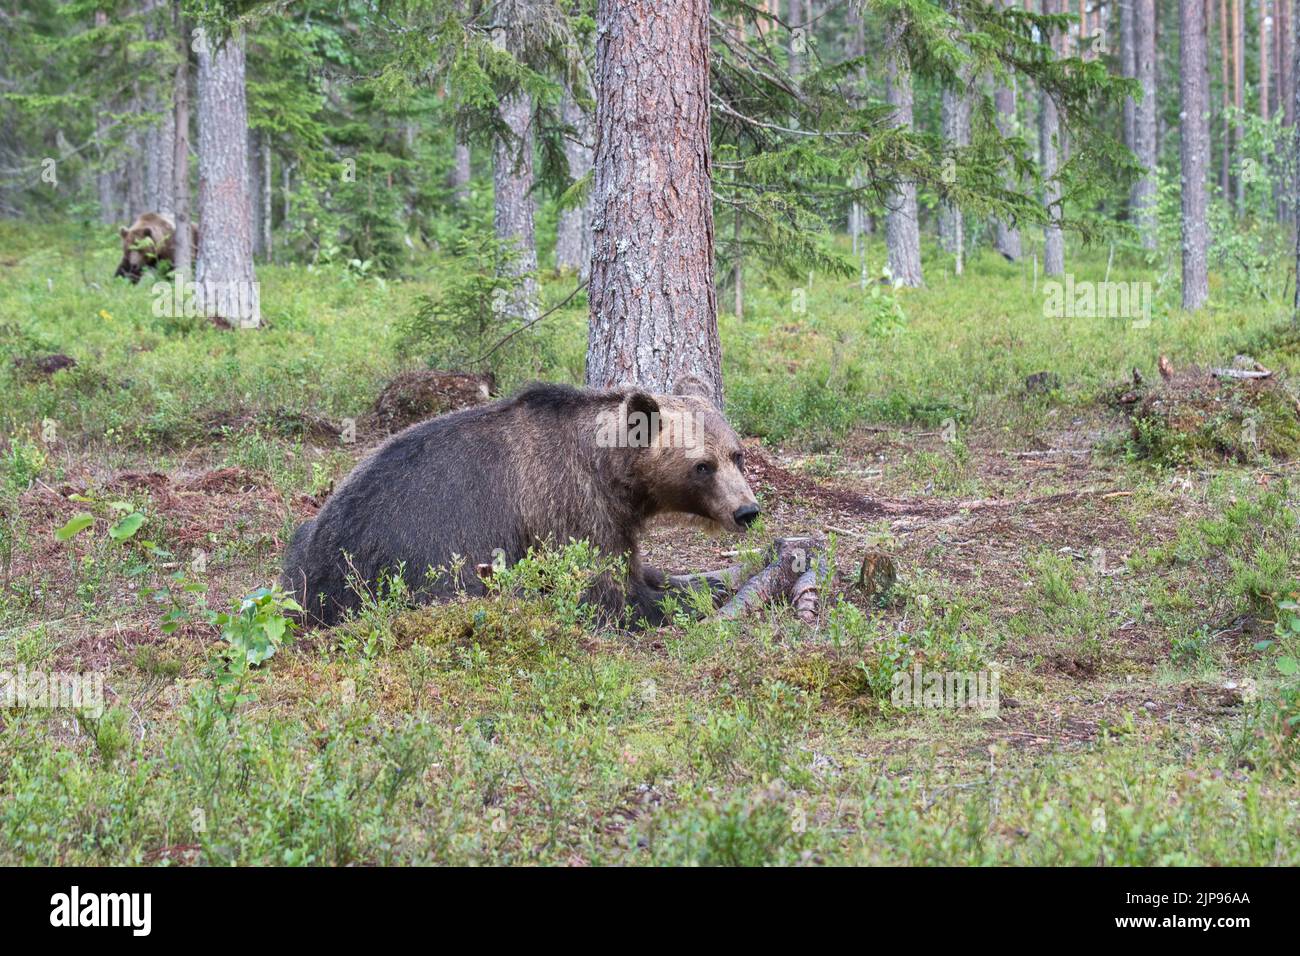 Brown bear (Ursus arctos) in the boreal forest or taiga of Finland Stock Photo